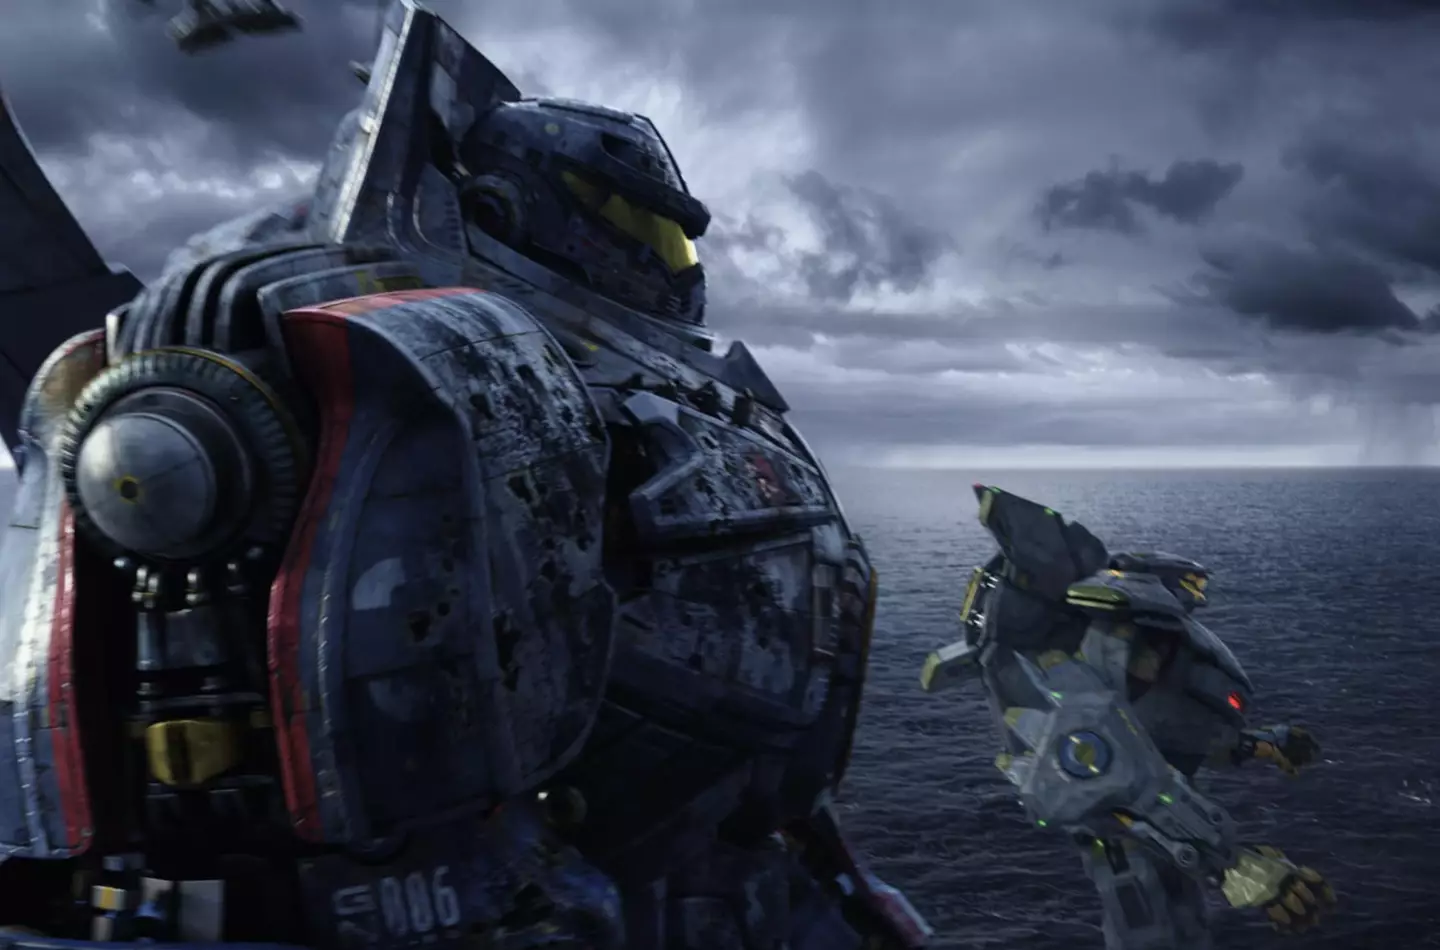 Pacific Rim is available to stream on Netflix now.